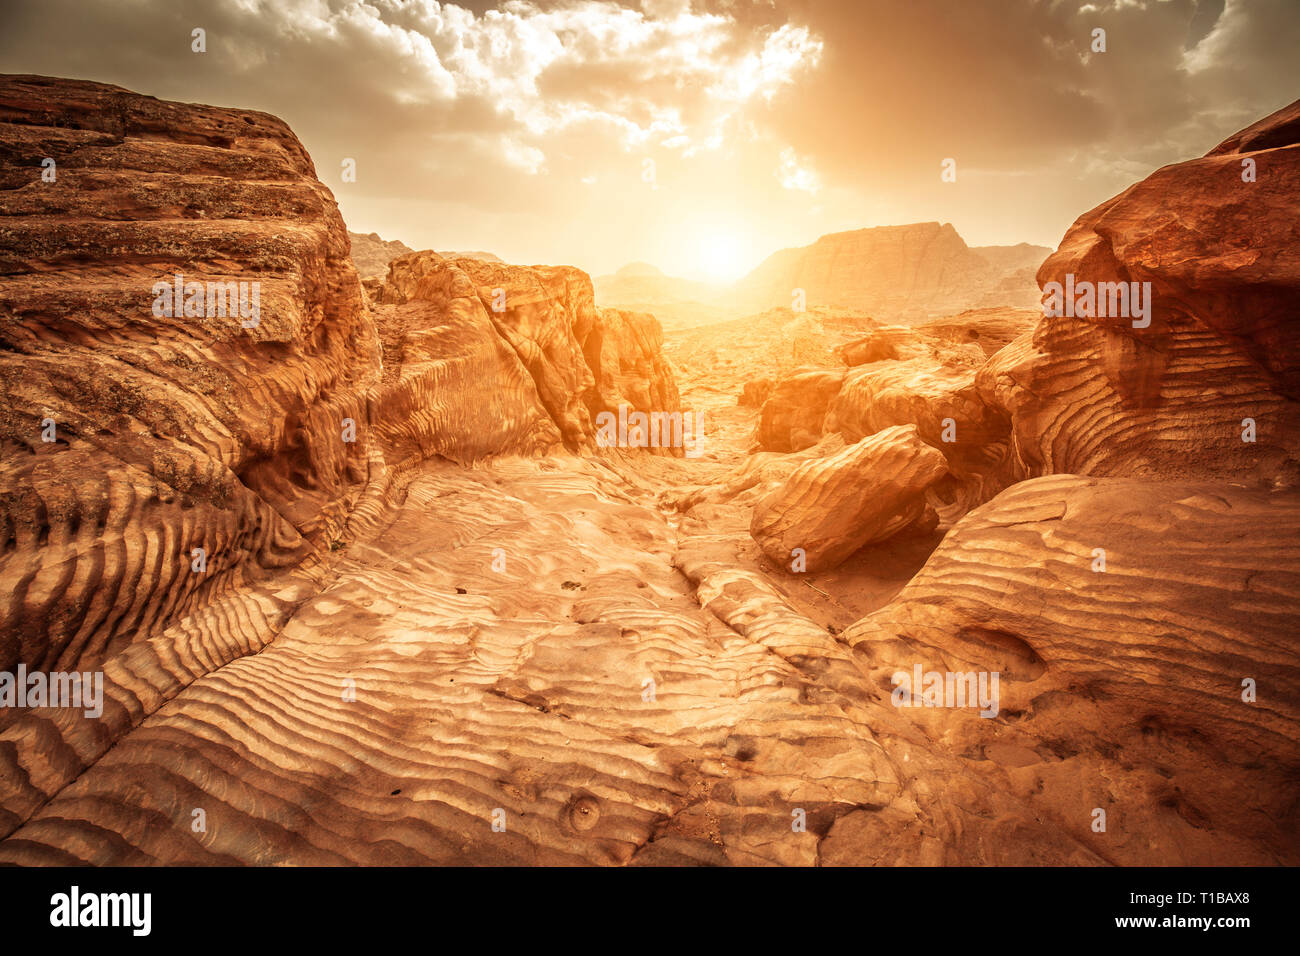 Detail of sandstone rocks in the light of sunset, path of the Nabataeans, picturesque landscape located in Petra, Jordan. Stock Photo